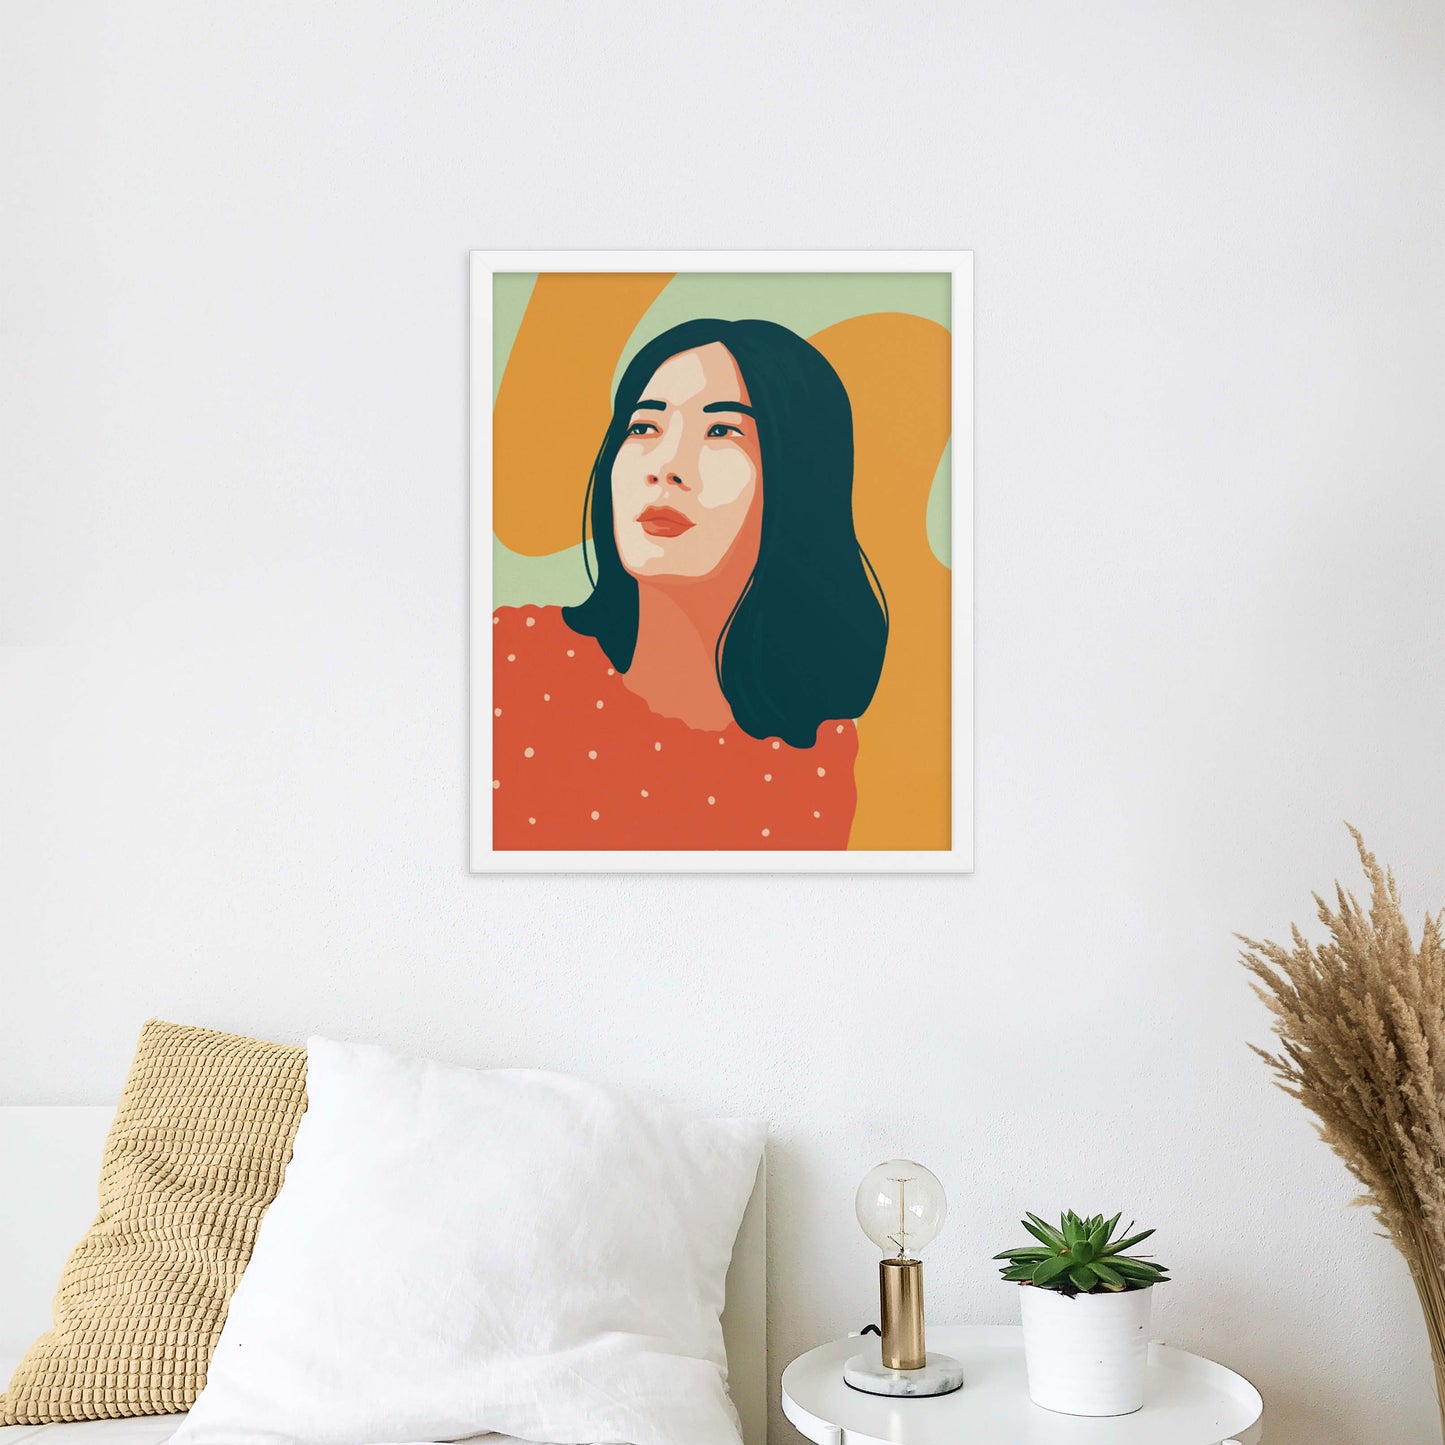 Bright and colorful Woman Wall art in white frame